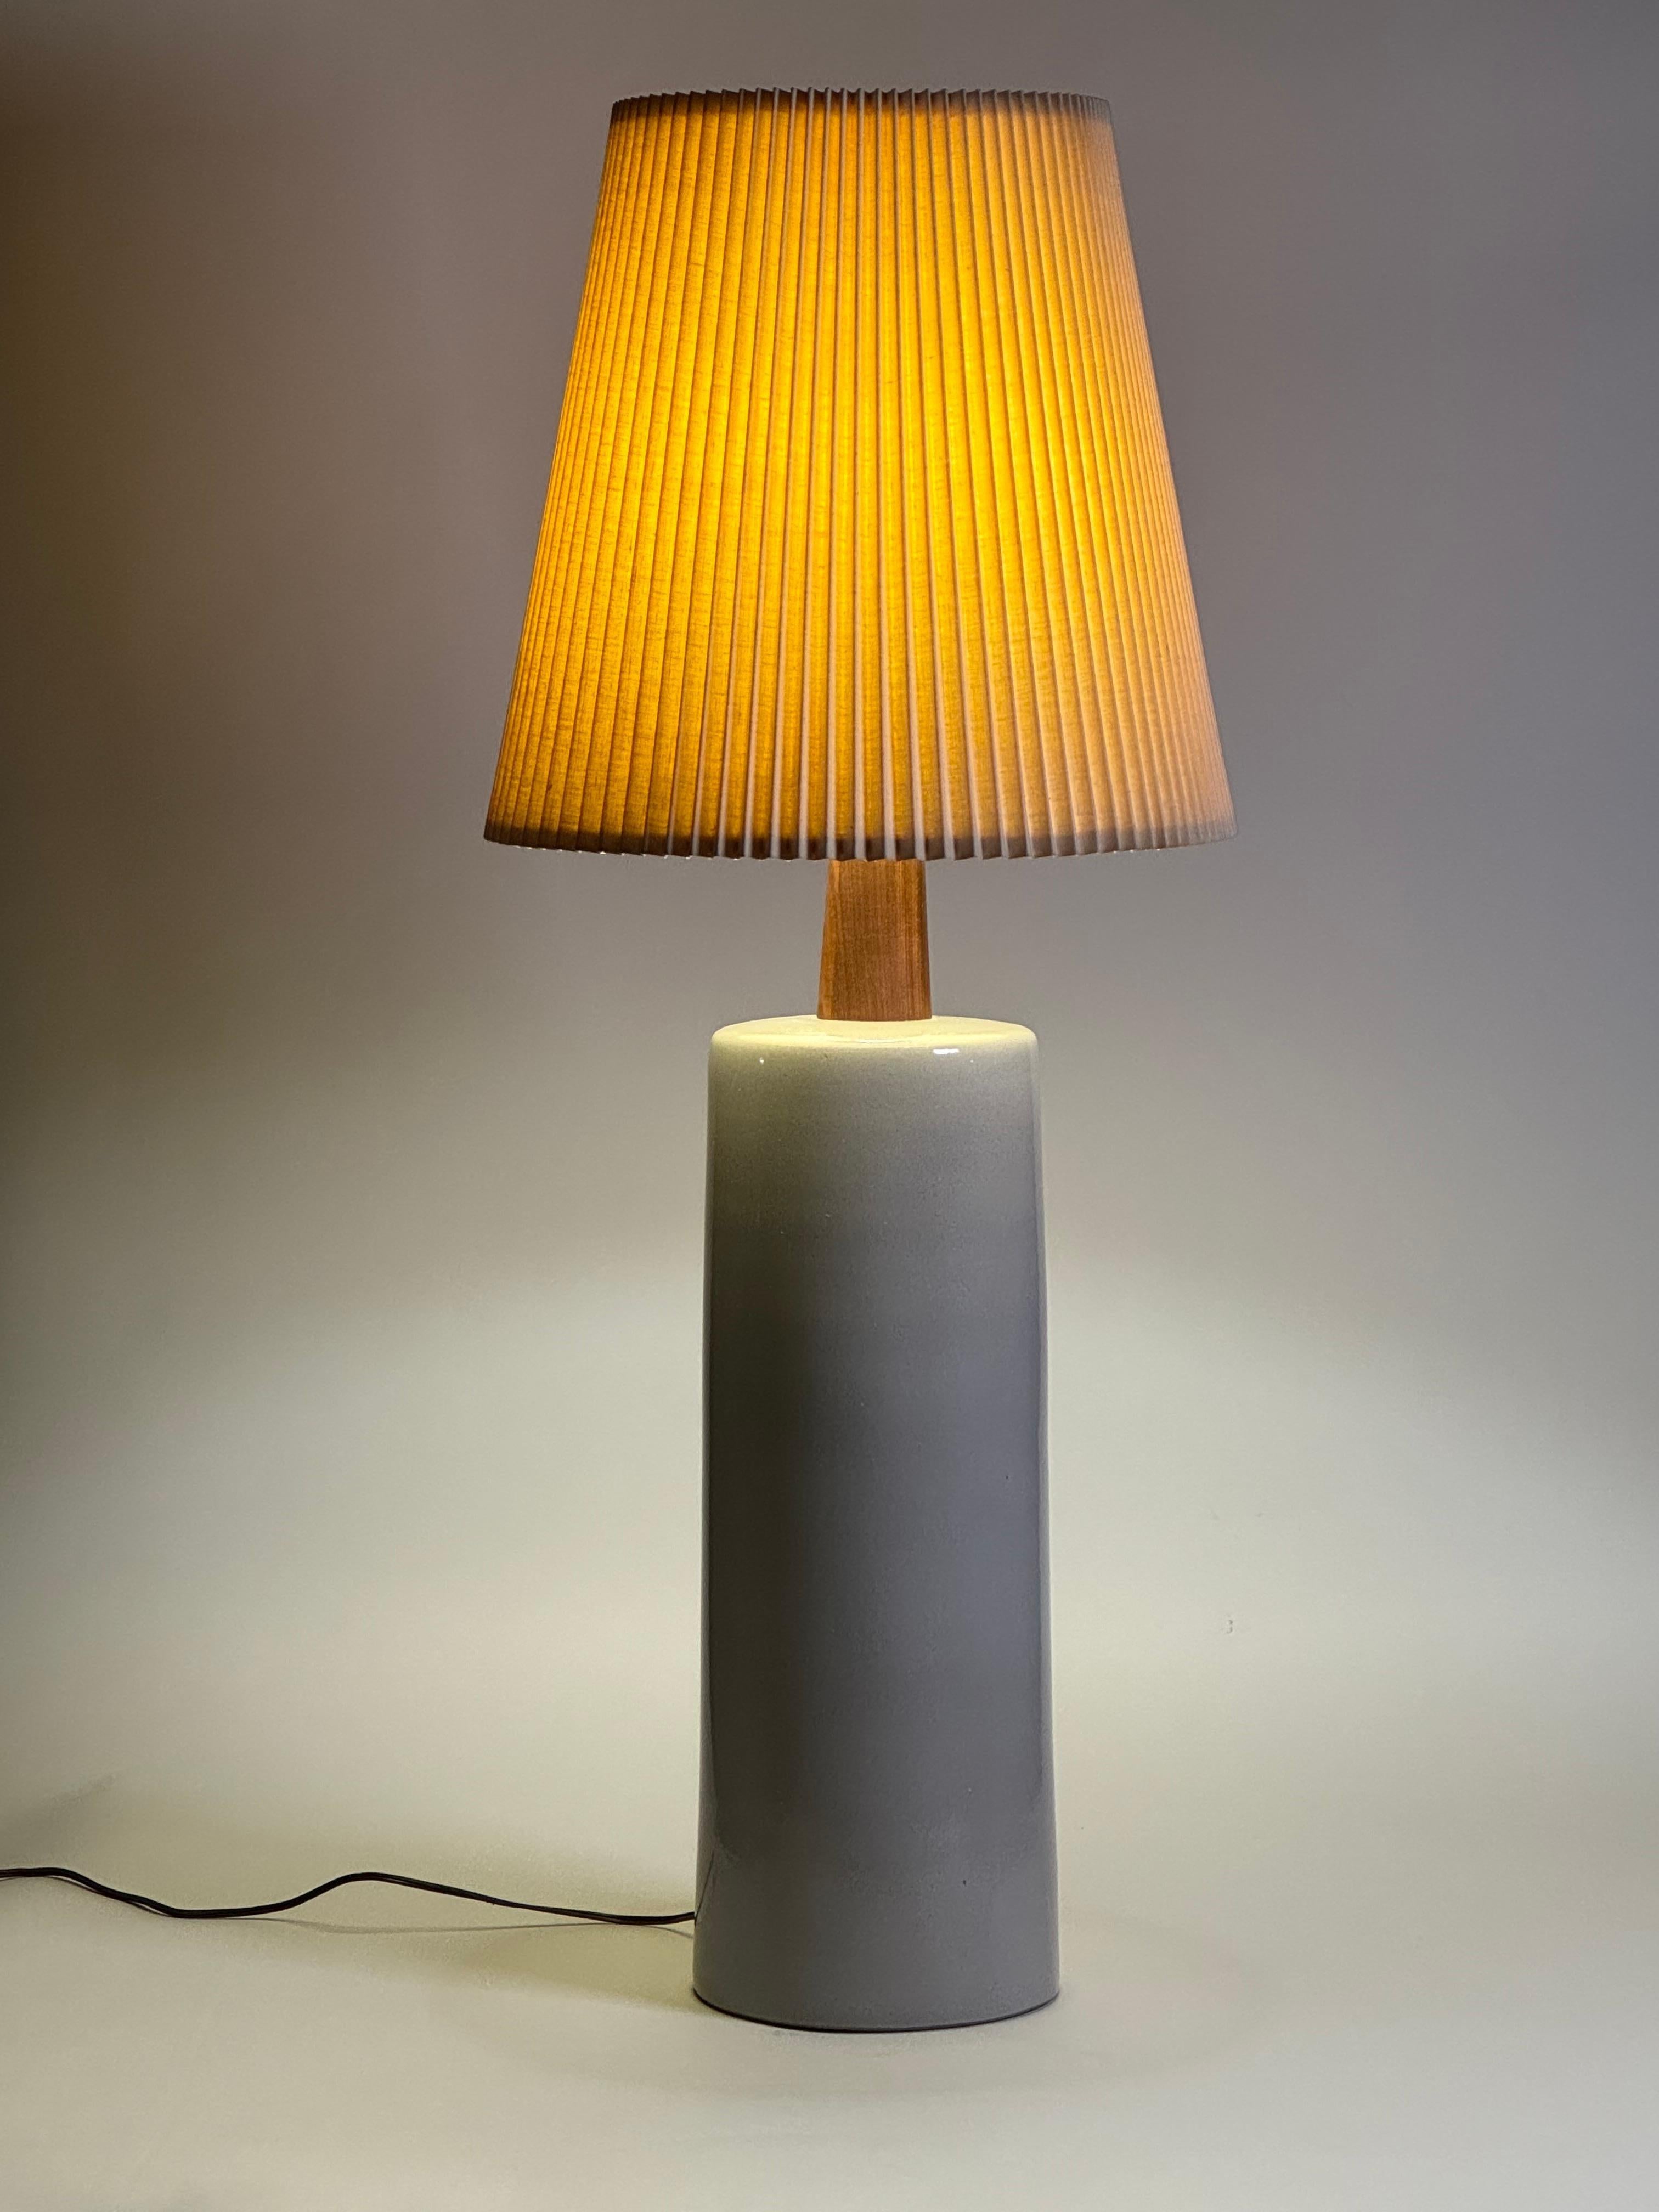 Impressive large scale ceramic and walnut table lamp by Jane and Gordon Martz for their company Marshall Studios. Soft speckled gray glaze in a slightly tapered form with a tapered walnut neck and a circular finial also in walnut. Measures 42.75